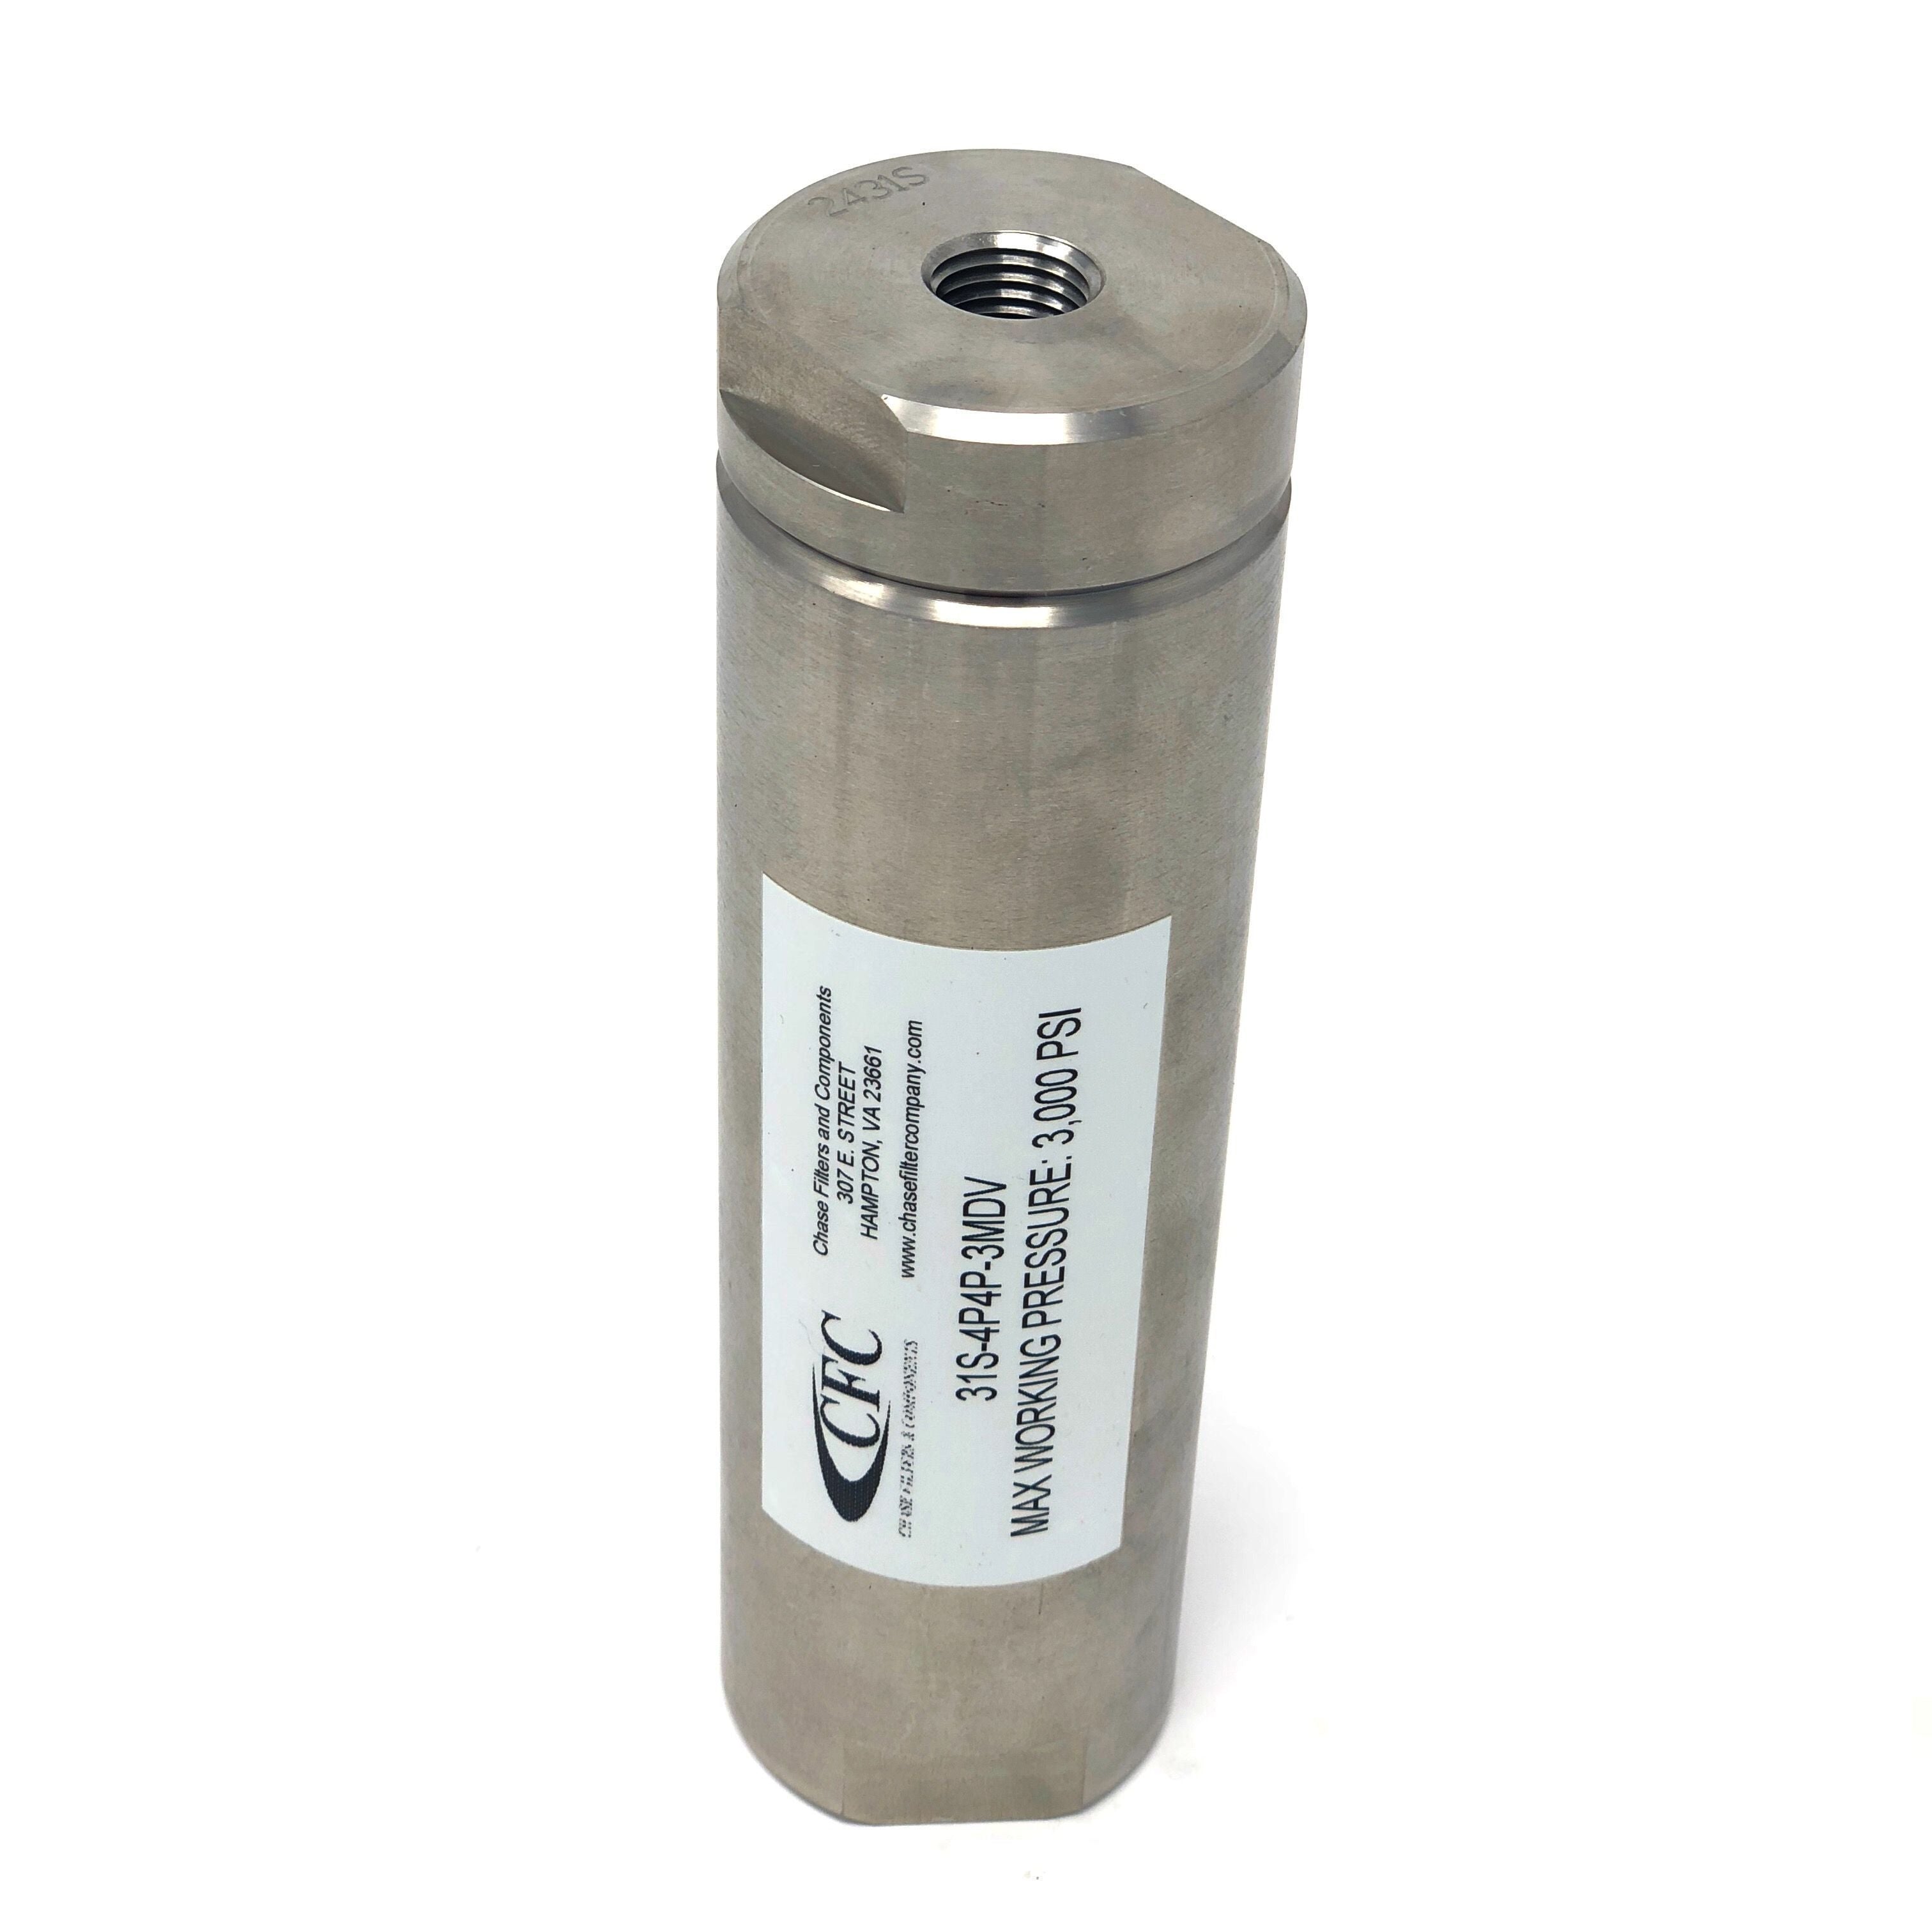 31S-2N2N-40SN : Chase High Pressure Inline Filter, 3000psi, 1/8" NPT, 40 Micron, No Visual Indicator, No Bypass